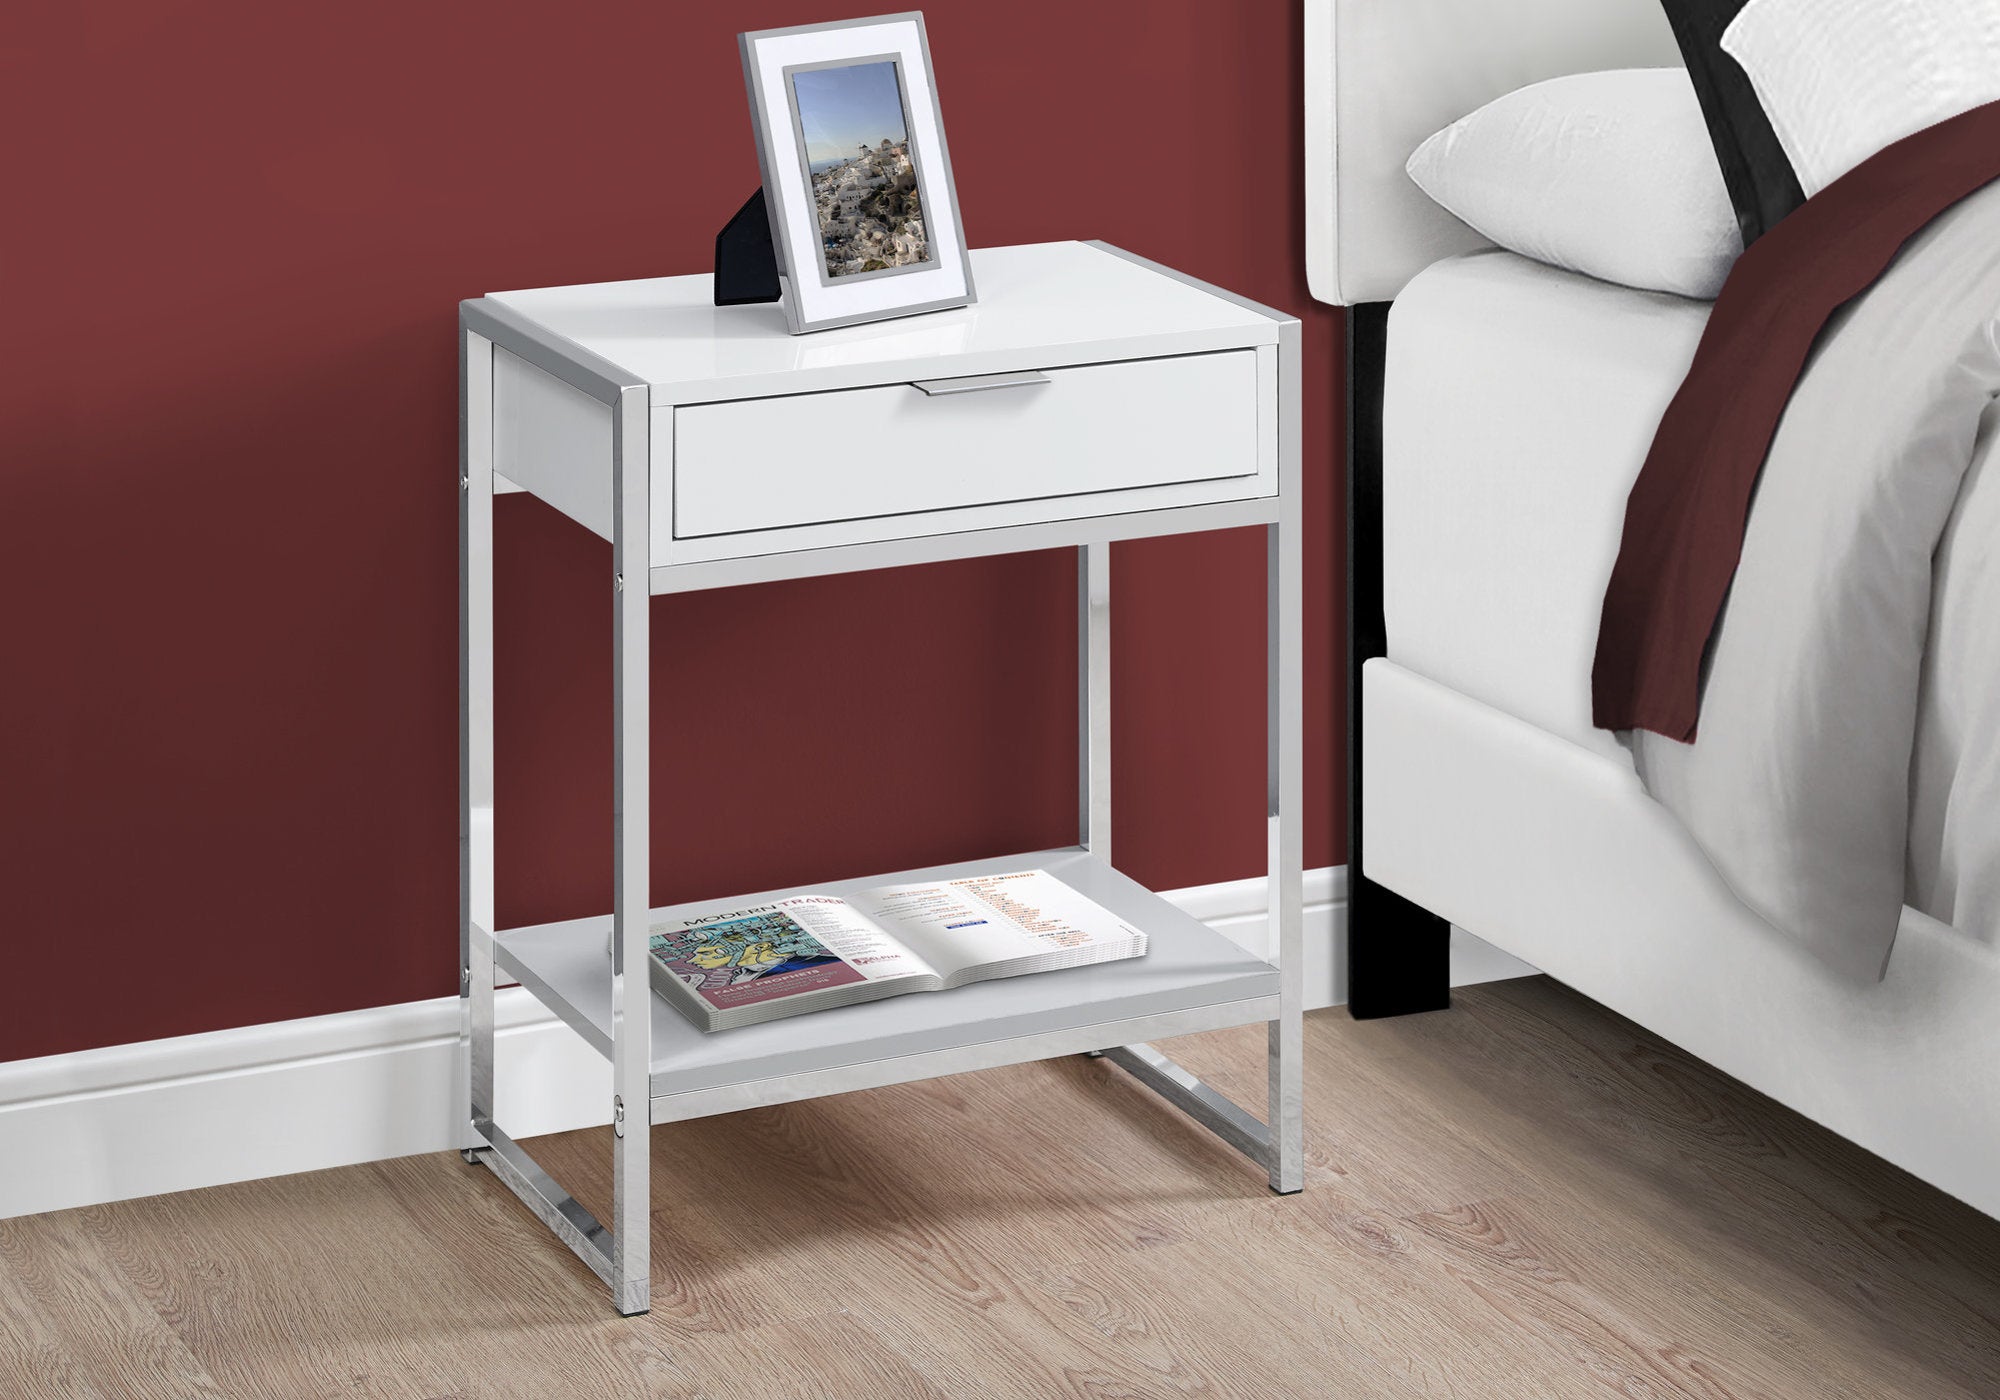 MN-883480    Accent Table, Side, End, Nightstand, Lamp, Living Room, Bedroom, Metal Legs, Laminate, Glossy White, Chrome, Contemporary, Modern